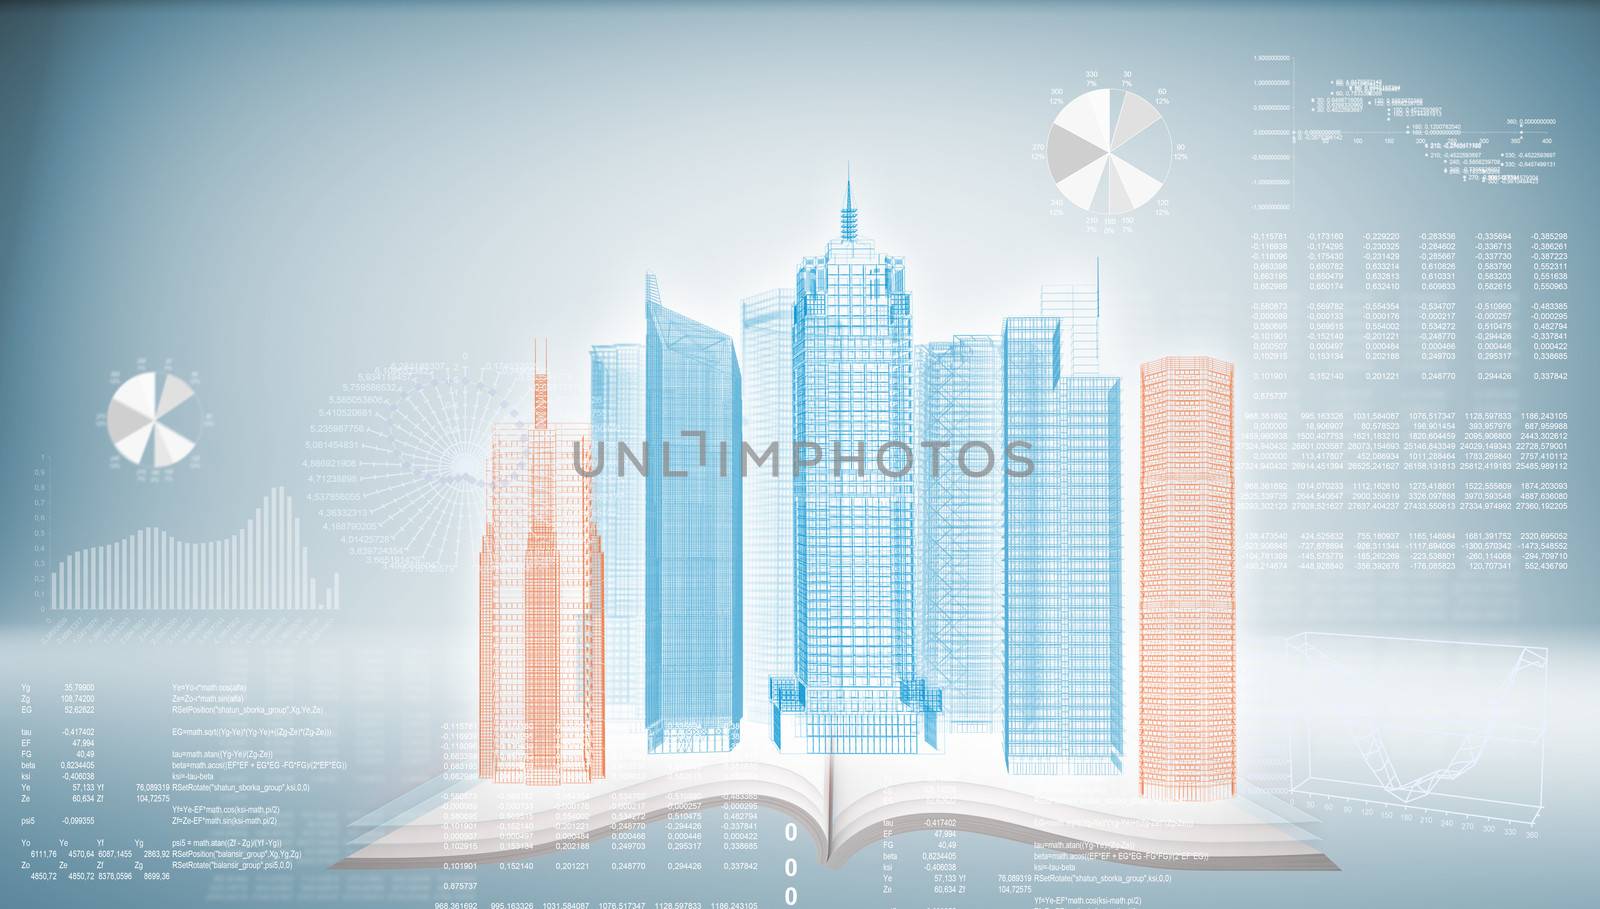 Hi-tech building on top of books on a blue background. The concept of future technologies knowledge based